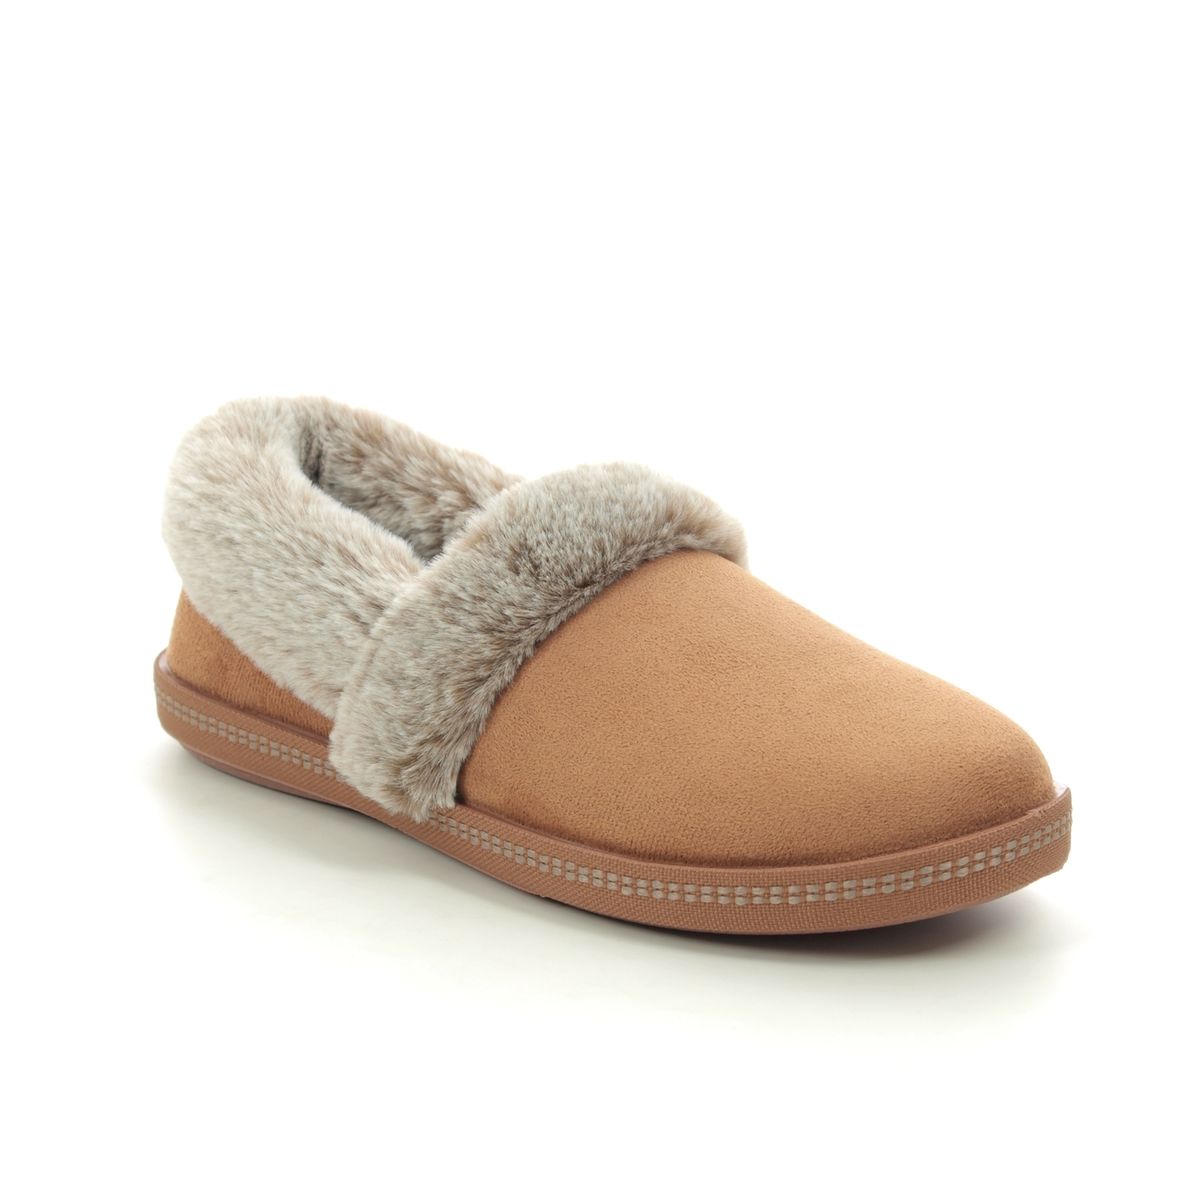 Skechers Cozy Campfire 32777 CSNT CHESTNUT slippers